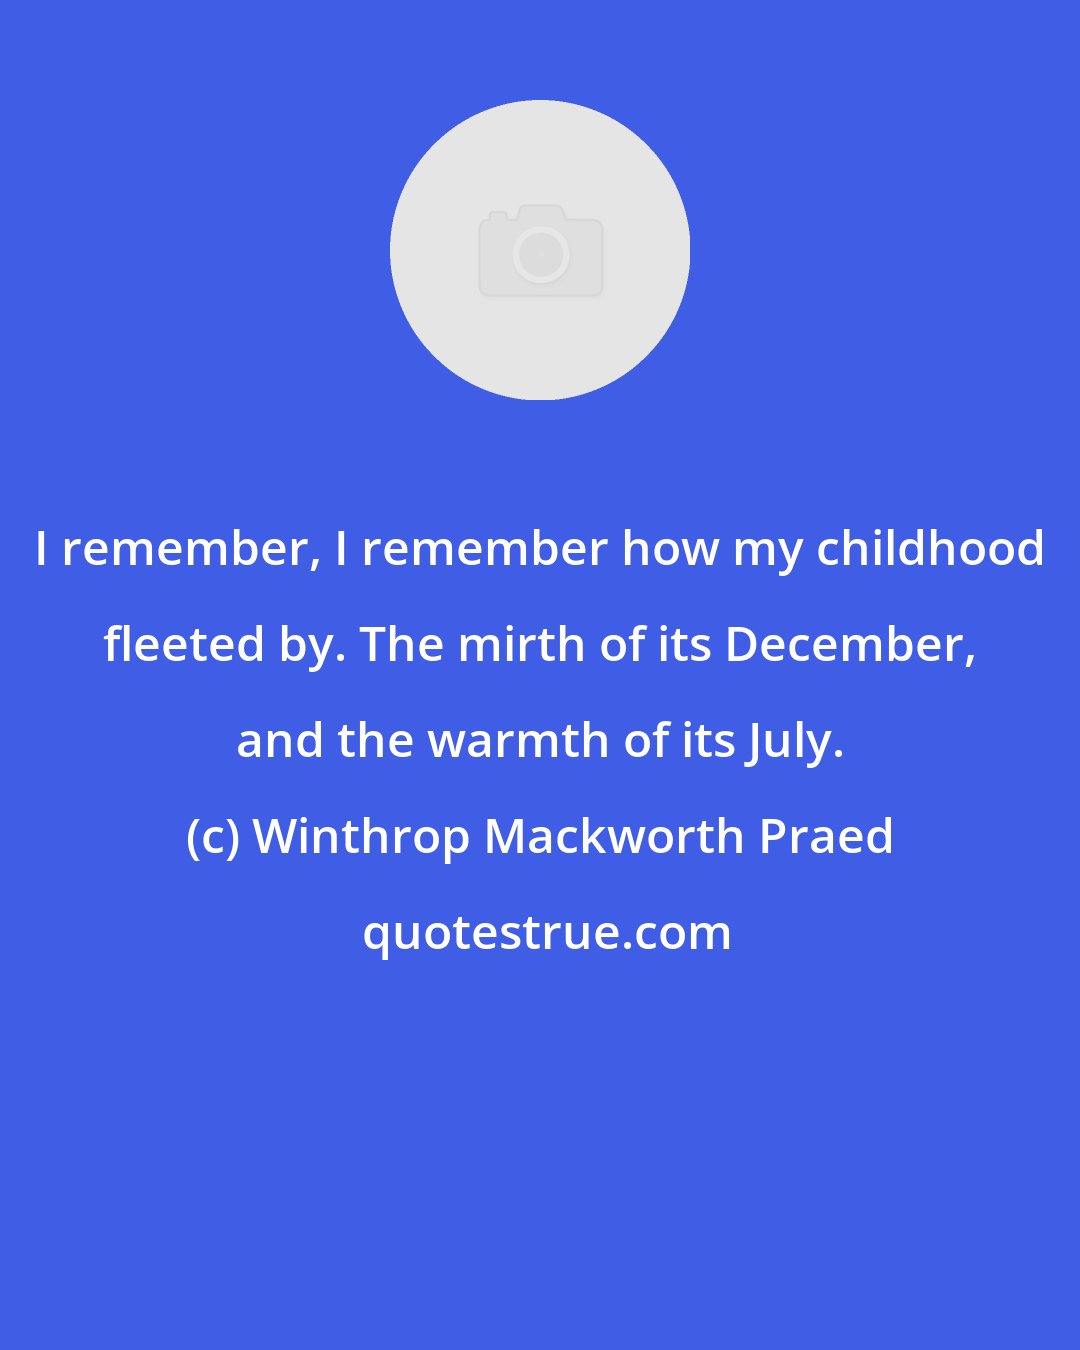 Winthrop Mackworth Praed: I remember, I remember how my childhood fleeted by. The mirth of its December, and the warmth of its July.